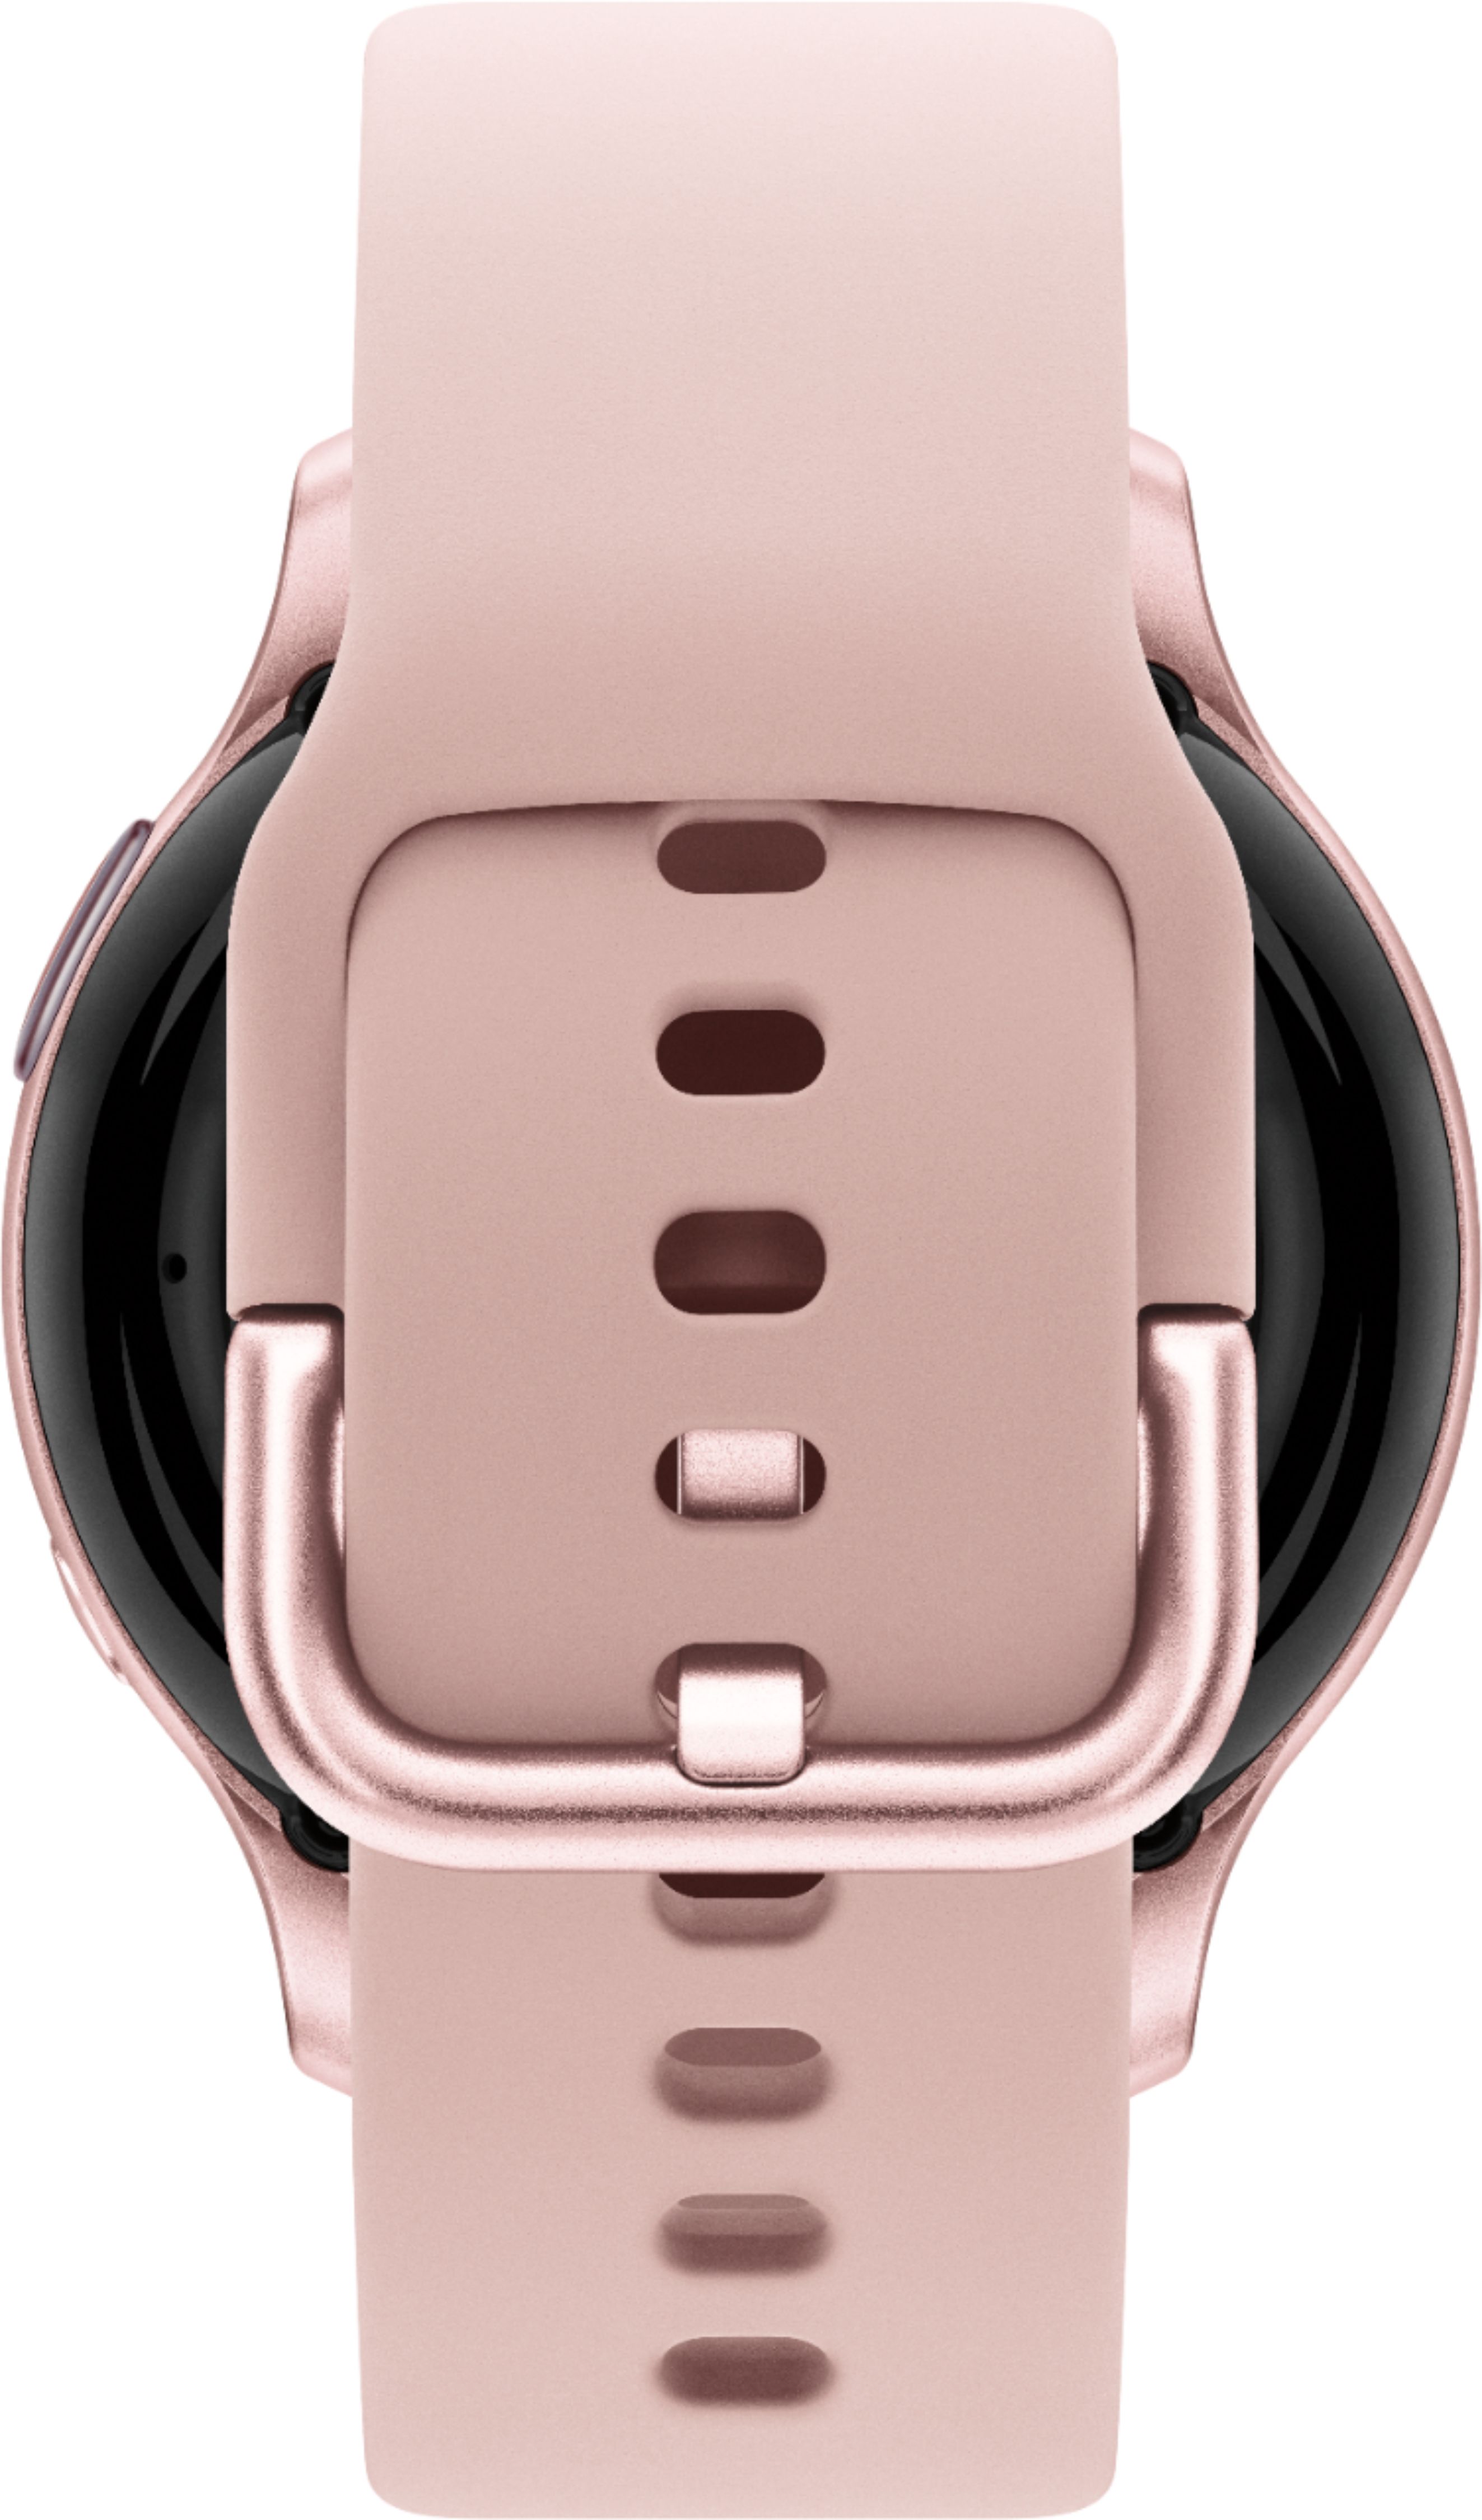 Back View: Samsung - Geek Squad Certified Refurbished Galaxy Watch Active2 Smartwatch 40mm Aluminum - Pink Gold